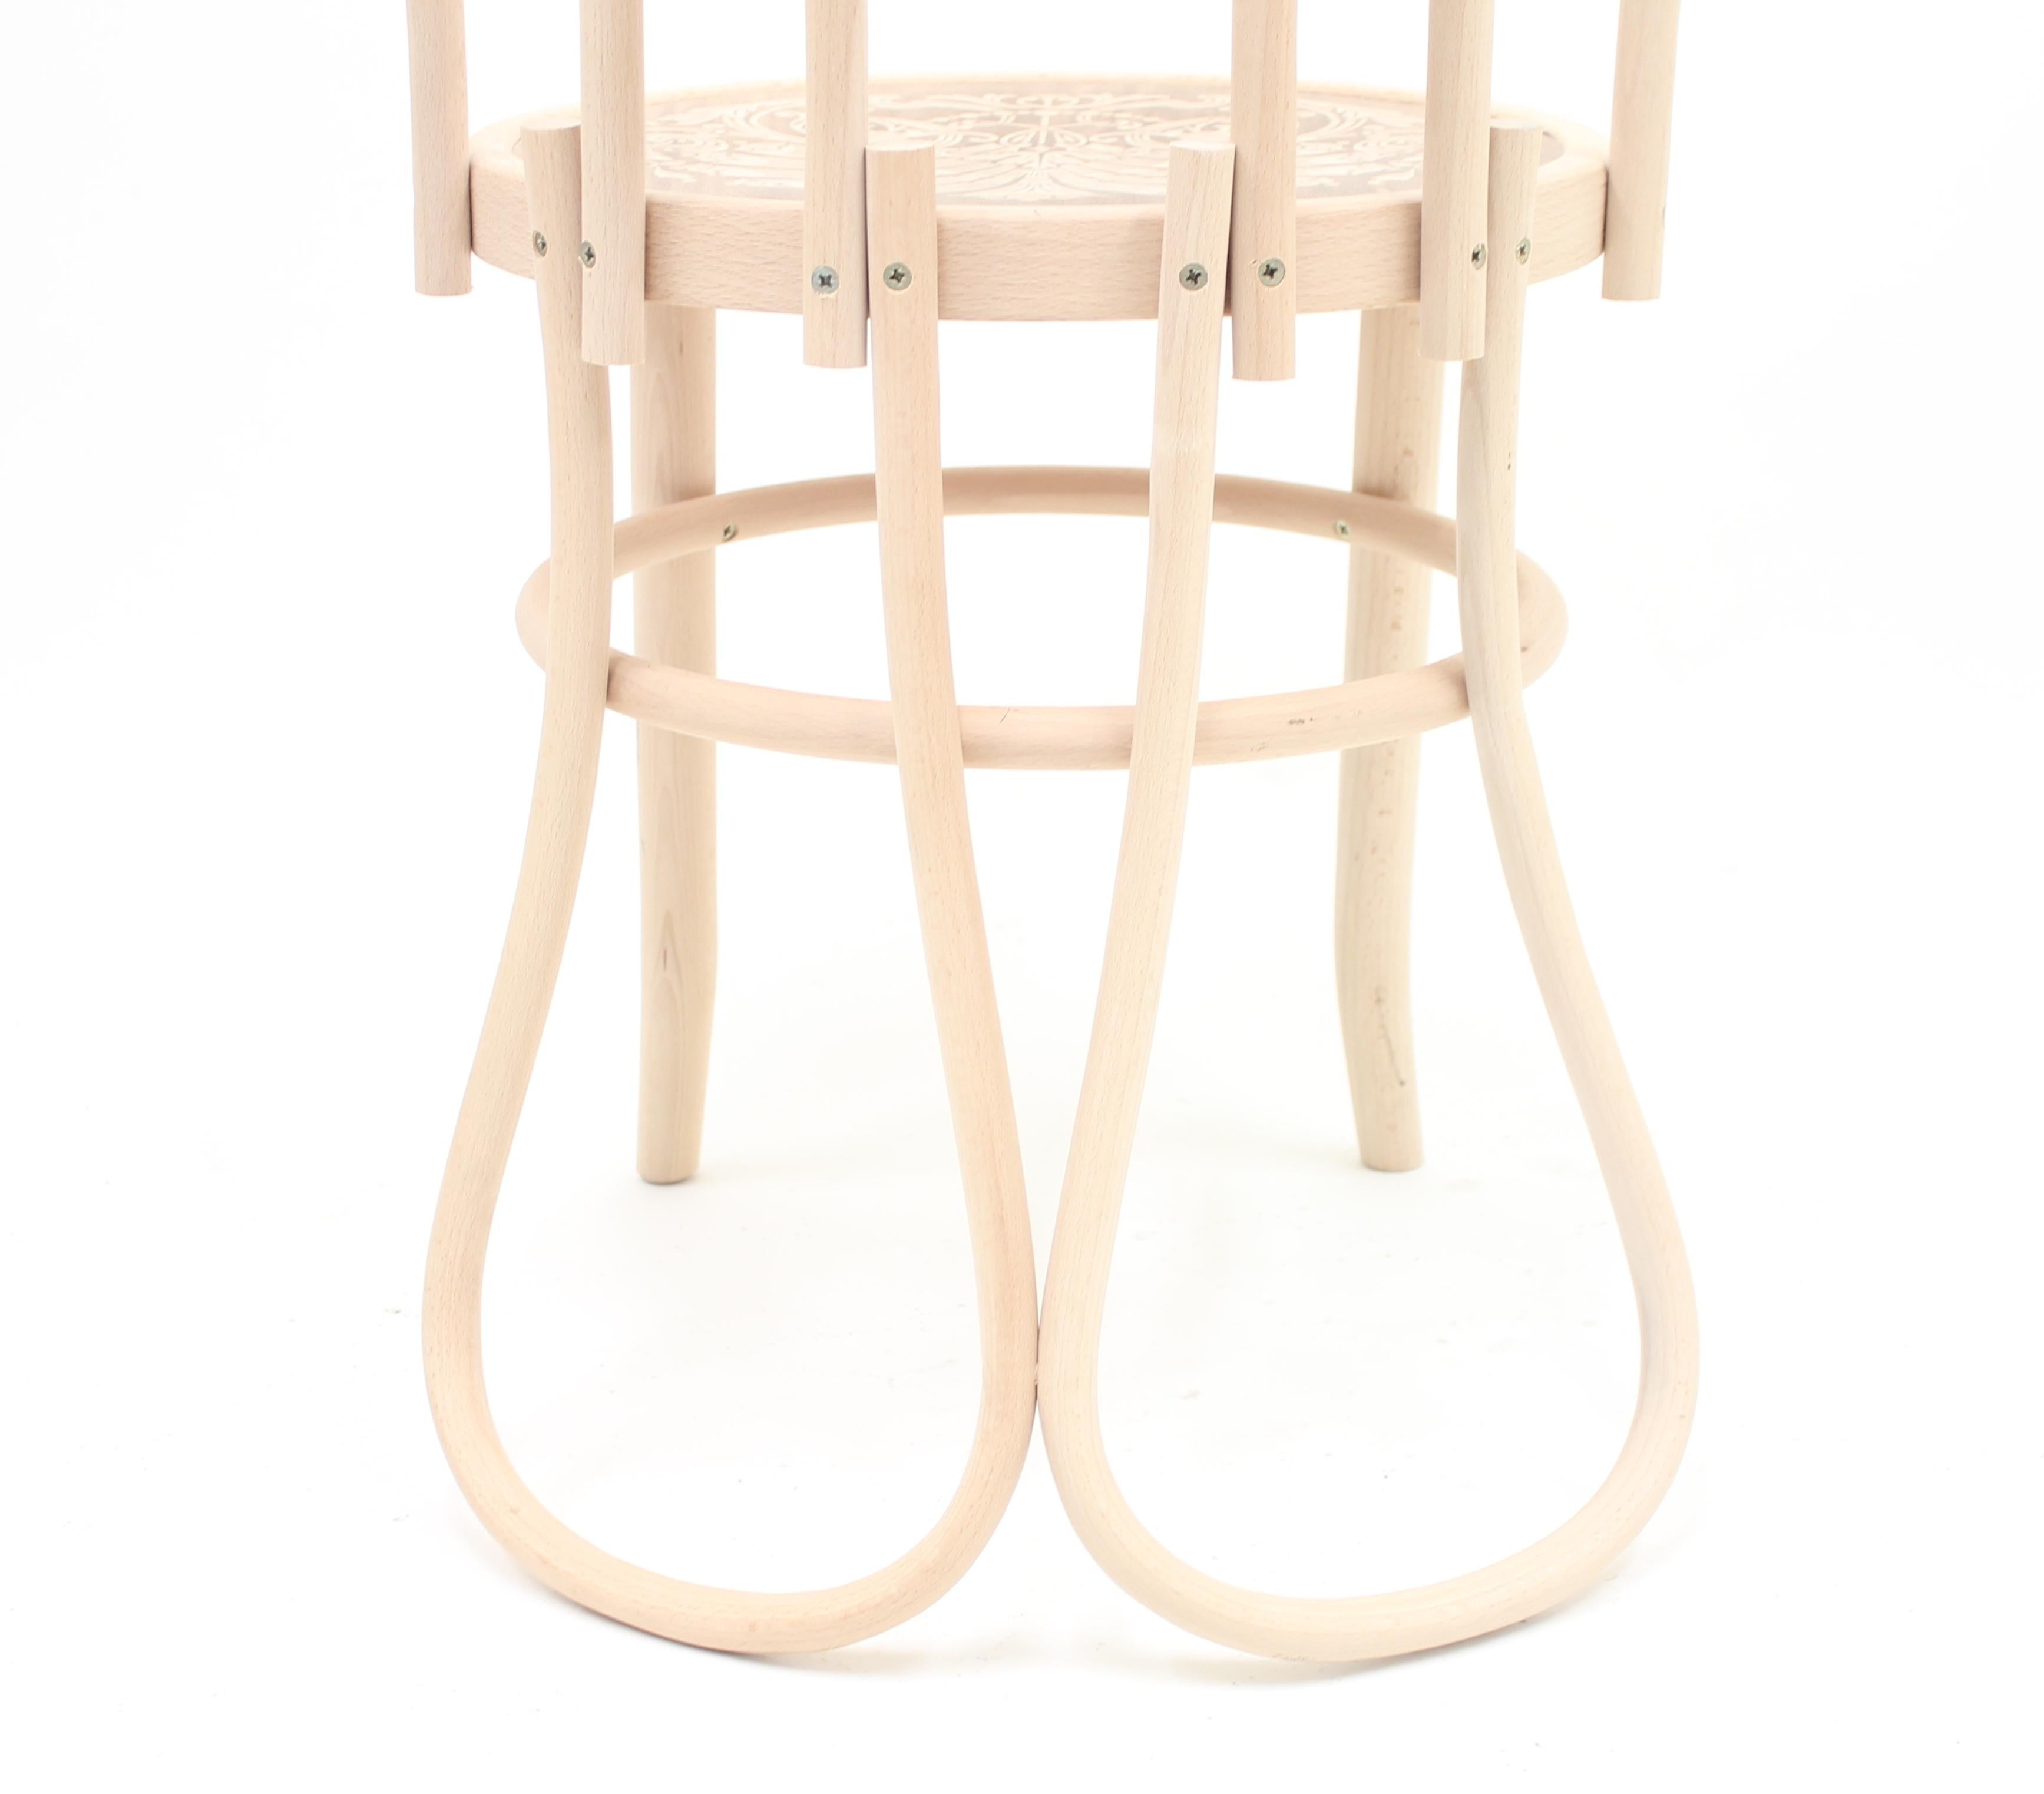 Back of the Chairs by Martino Gamper for the Conran Shop/Thonet, 2008 For Sale 3